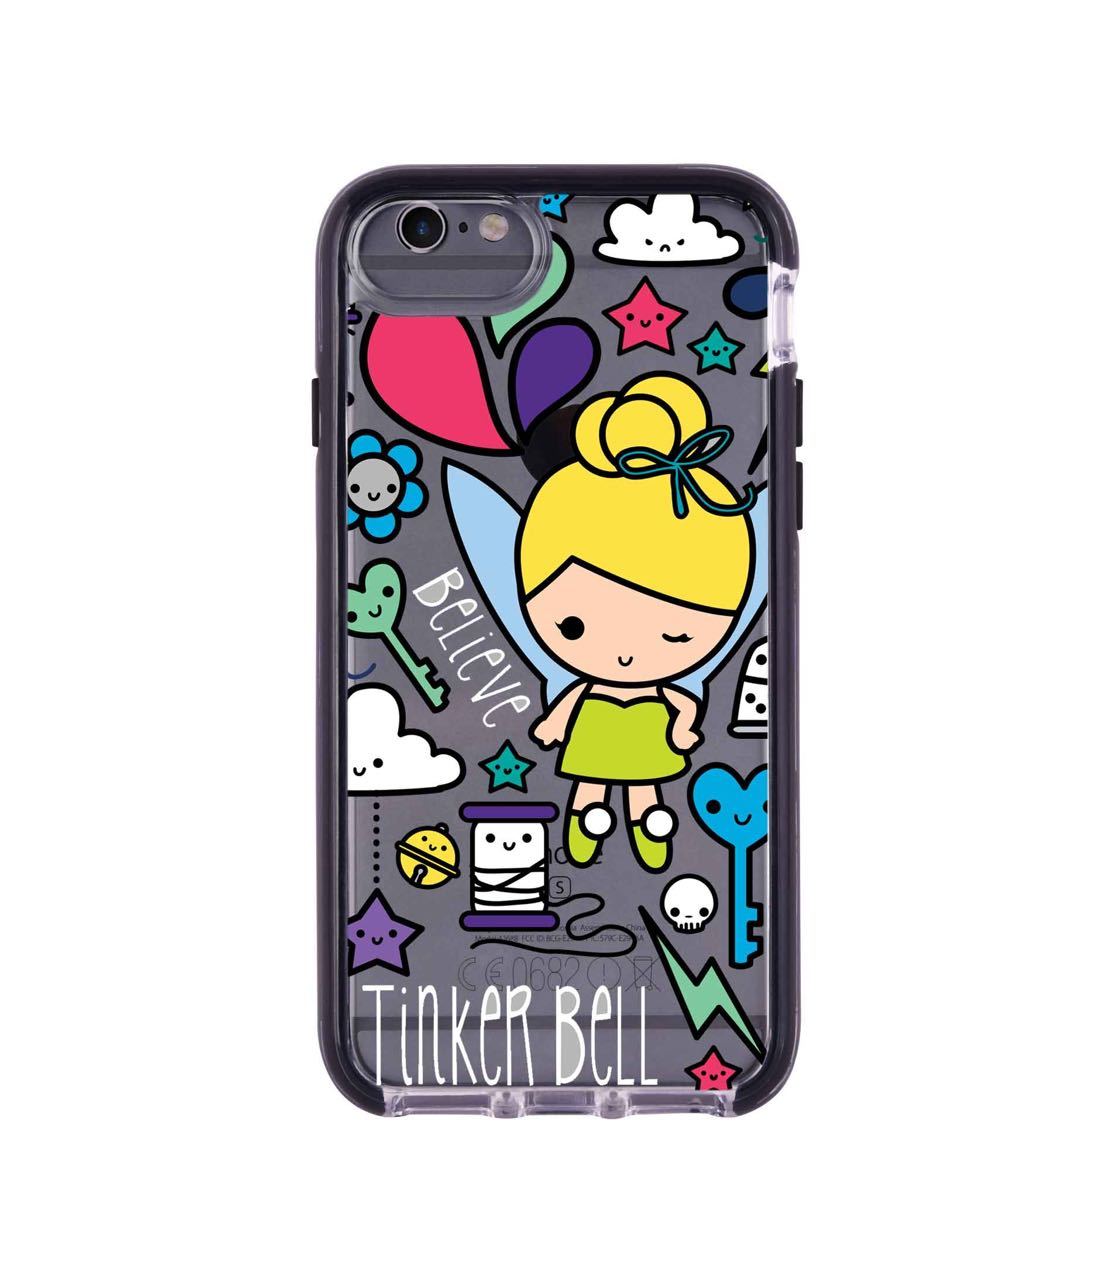 Tinker World - Extreme Phone Case for iPhone 6 Plus